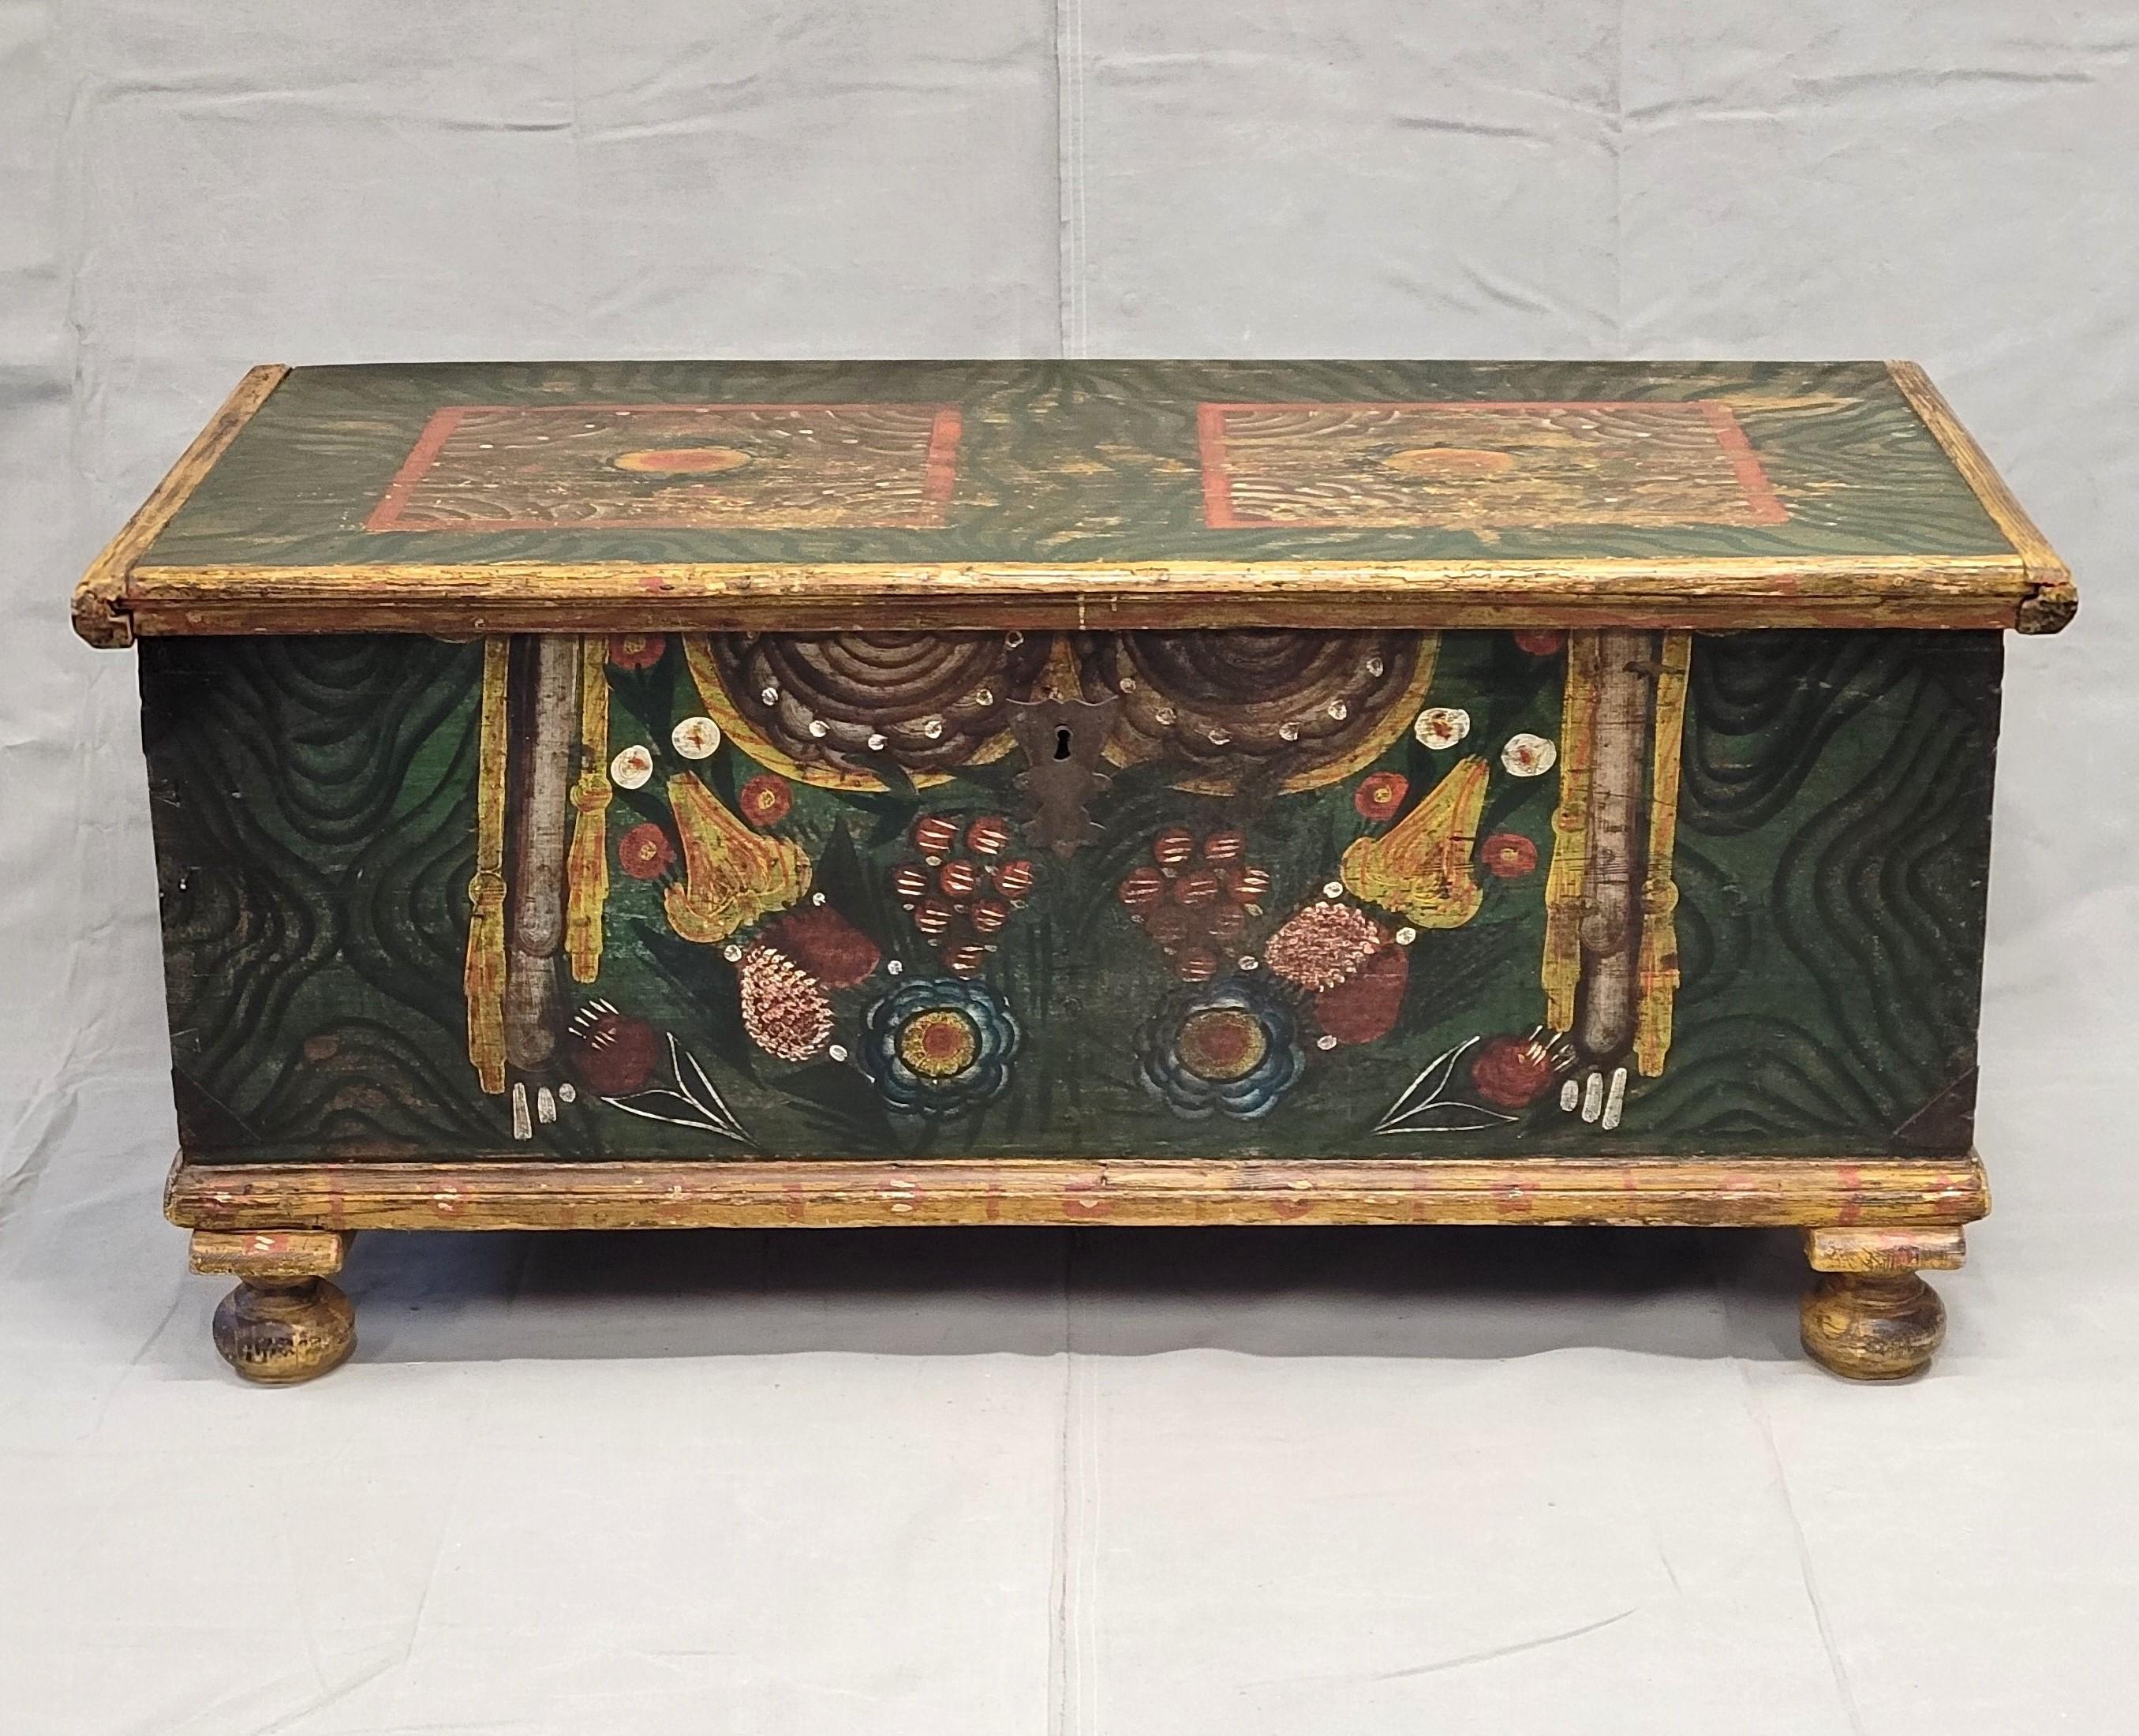 An absolutely charming antique Romanian or eastern European painted blanket chest. Original paint in shades of green, yellow, red, blue and black. Original iron hardware. Using this piece as a coffee table or at the foot of the bed makes a stunning